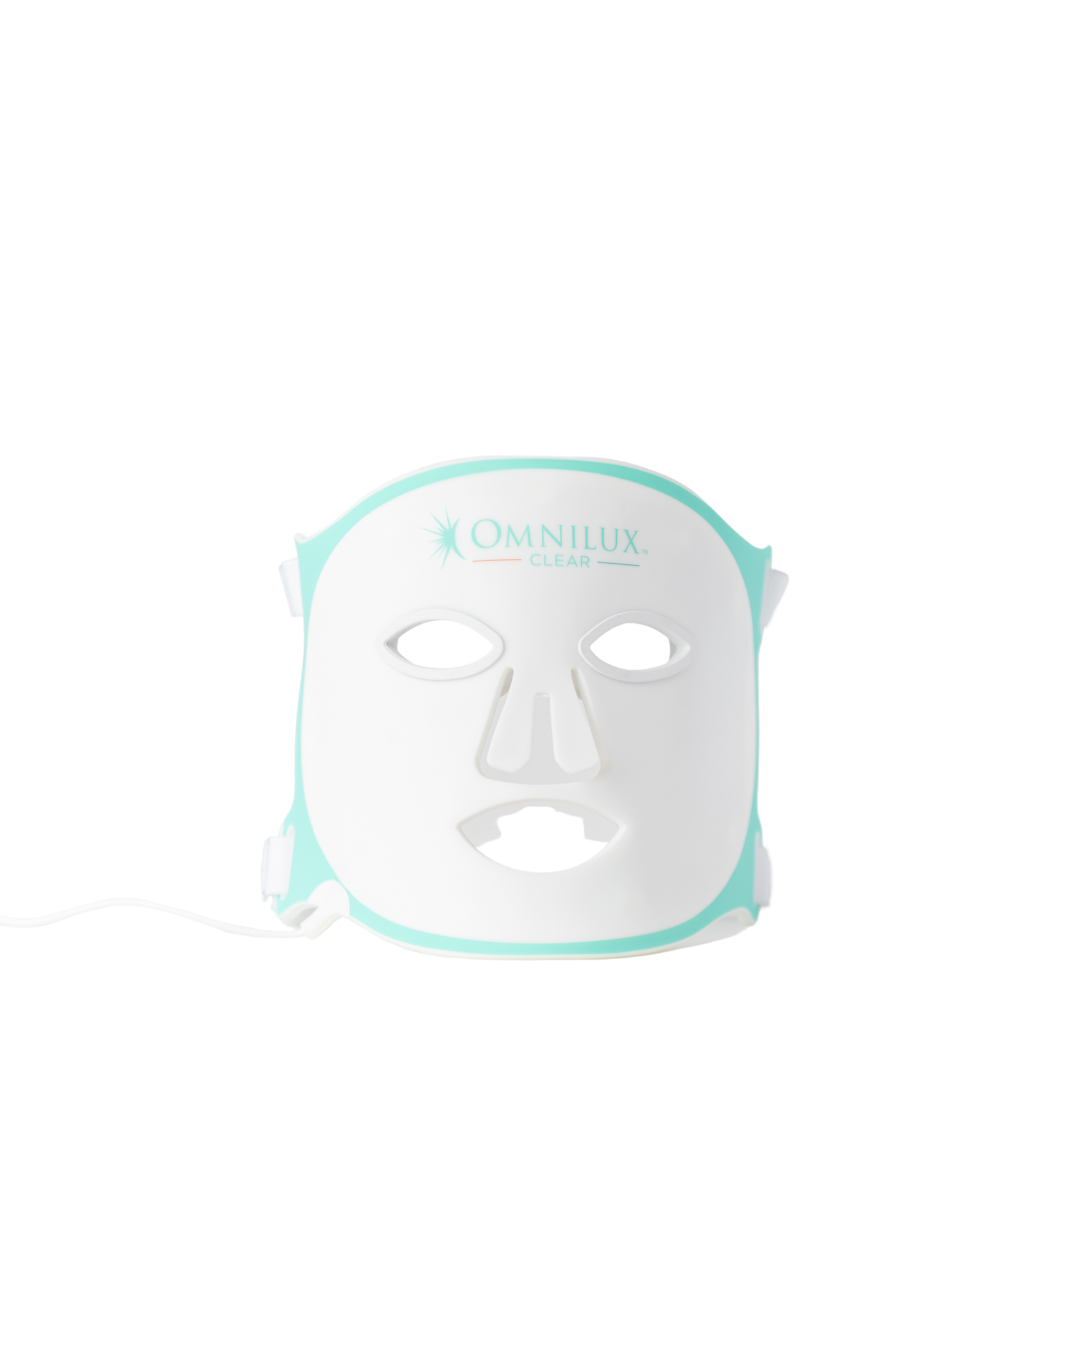 Omnilux Clear for Acne LED Therapy Device